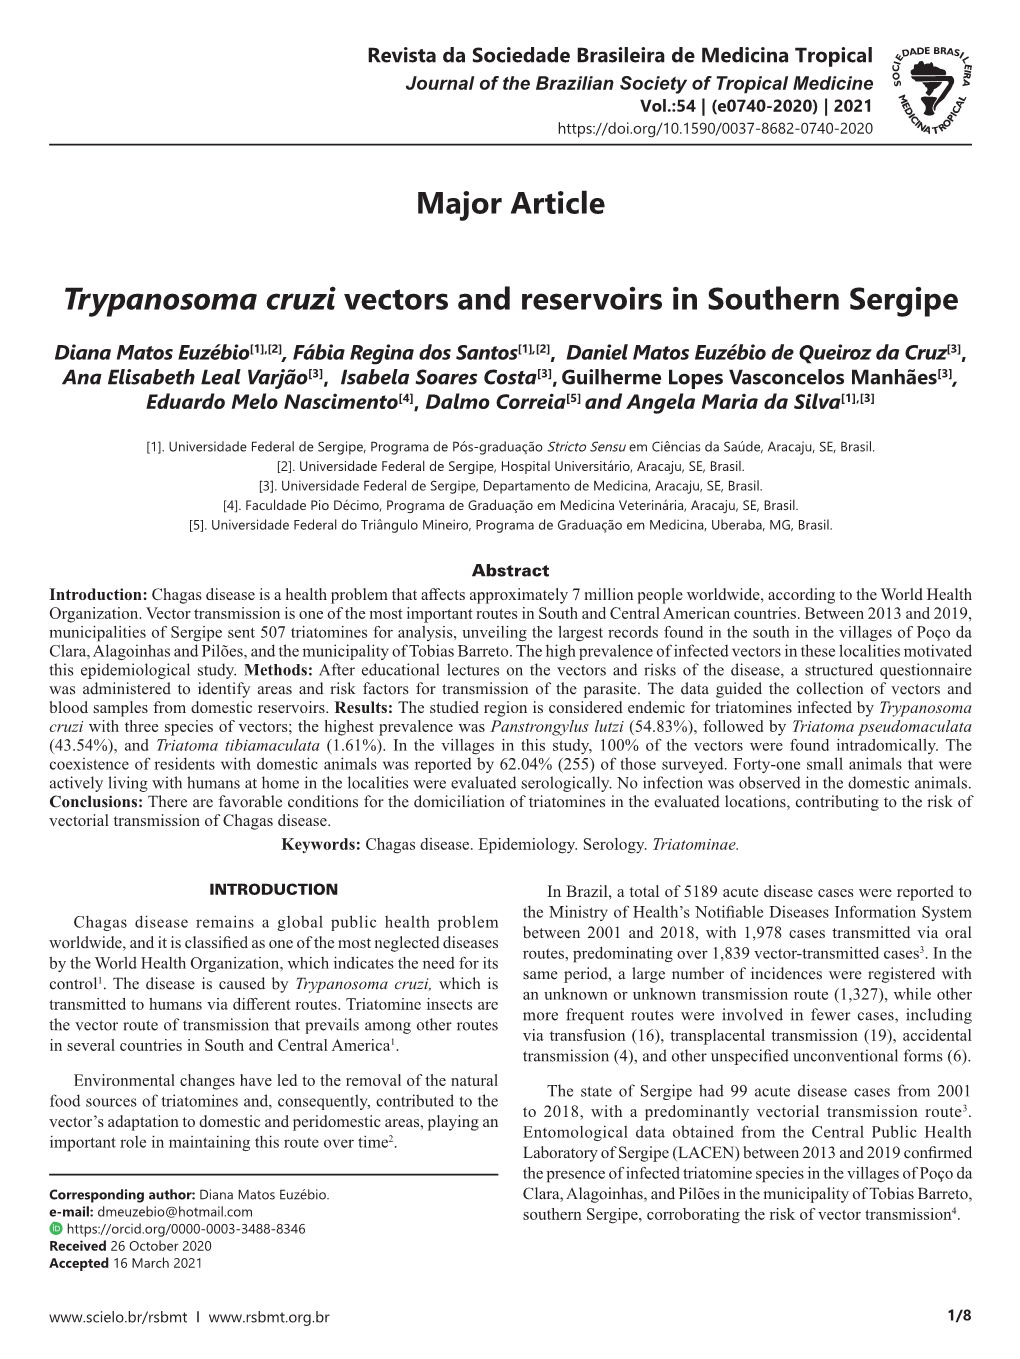 Major Article Trypanosoma Cruzi Vectors and Reservoirs in Southern Sergipe